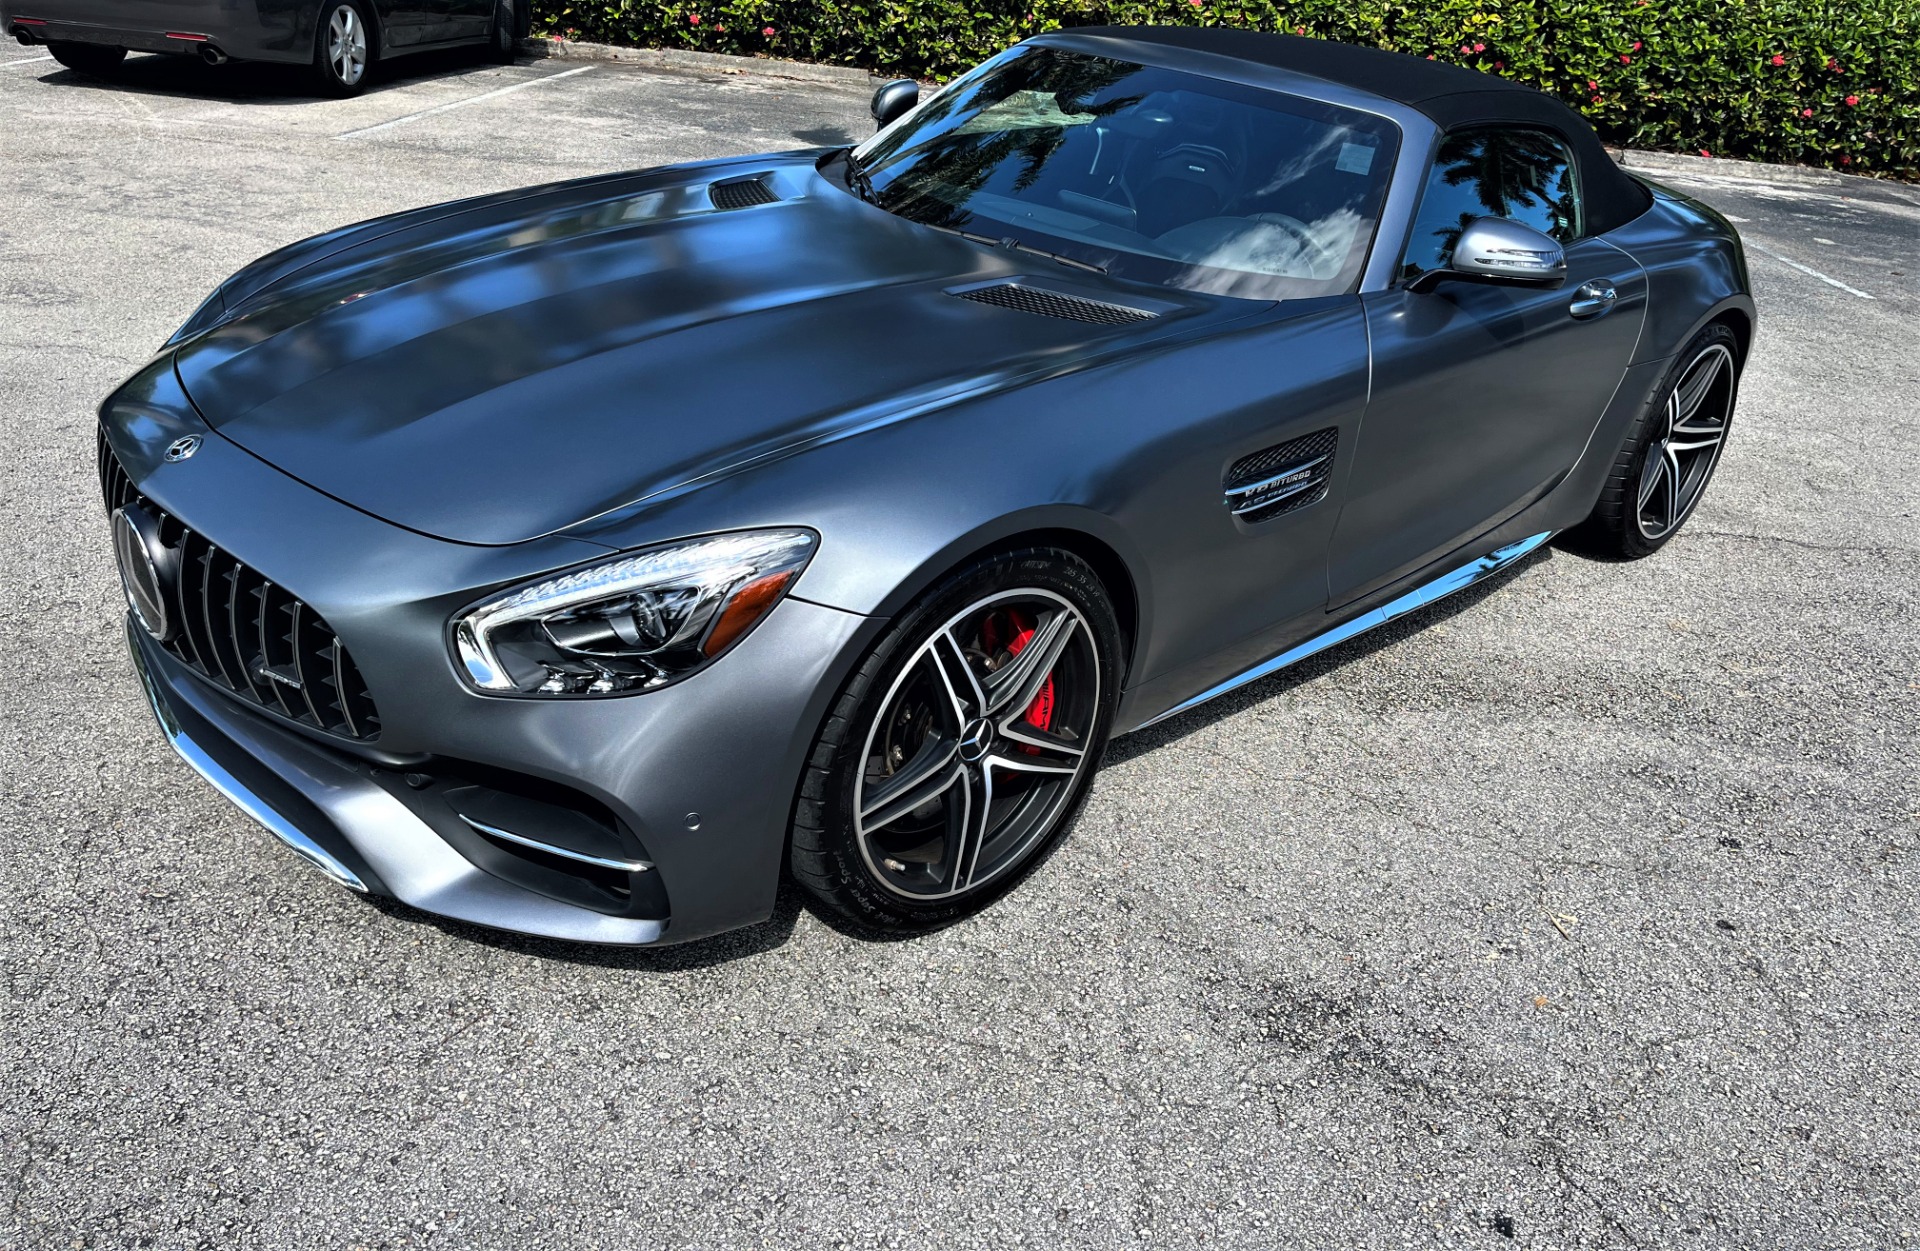 Used 2018 Mercedes-Benz AMG GT C for sale $119,850 at The Gables Sports Cars in Miami FL 33146 1